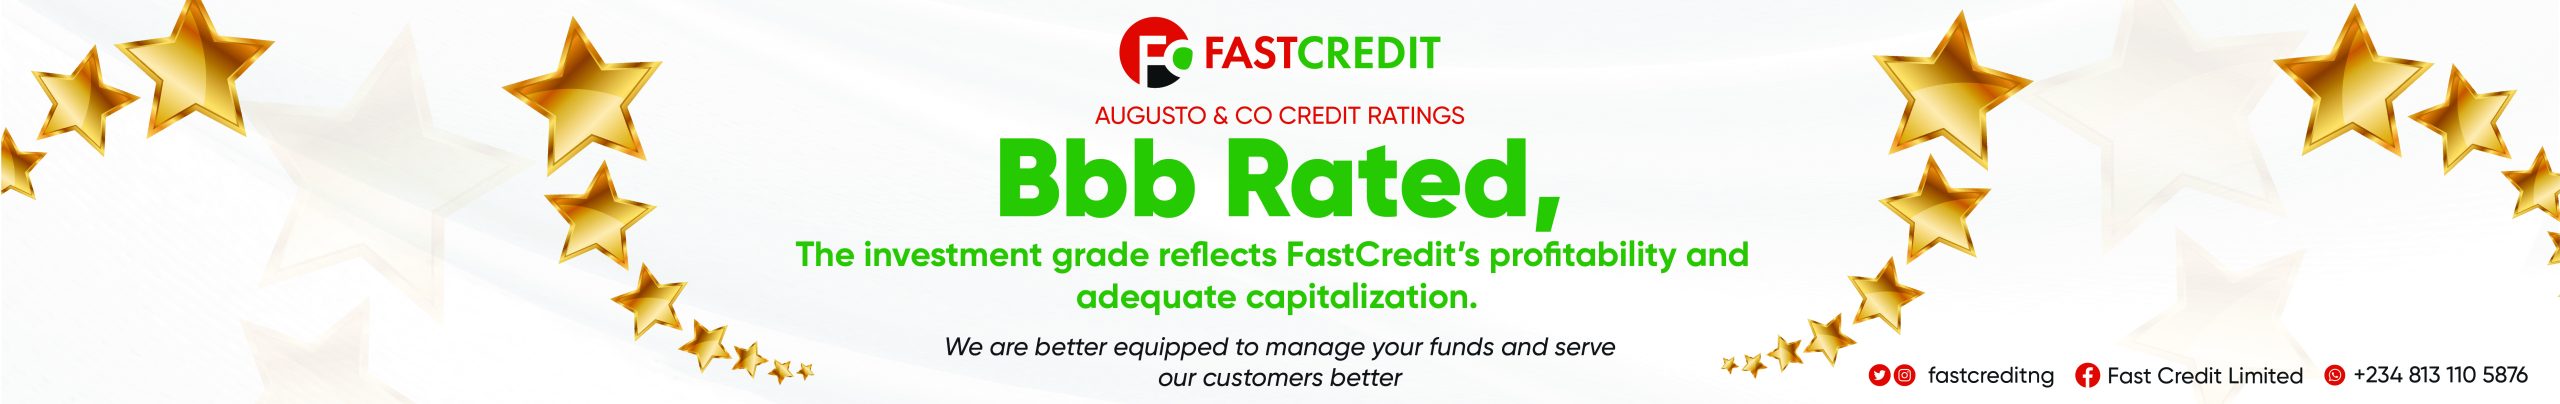 Fast credit – middle banner